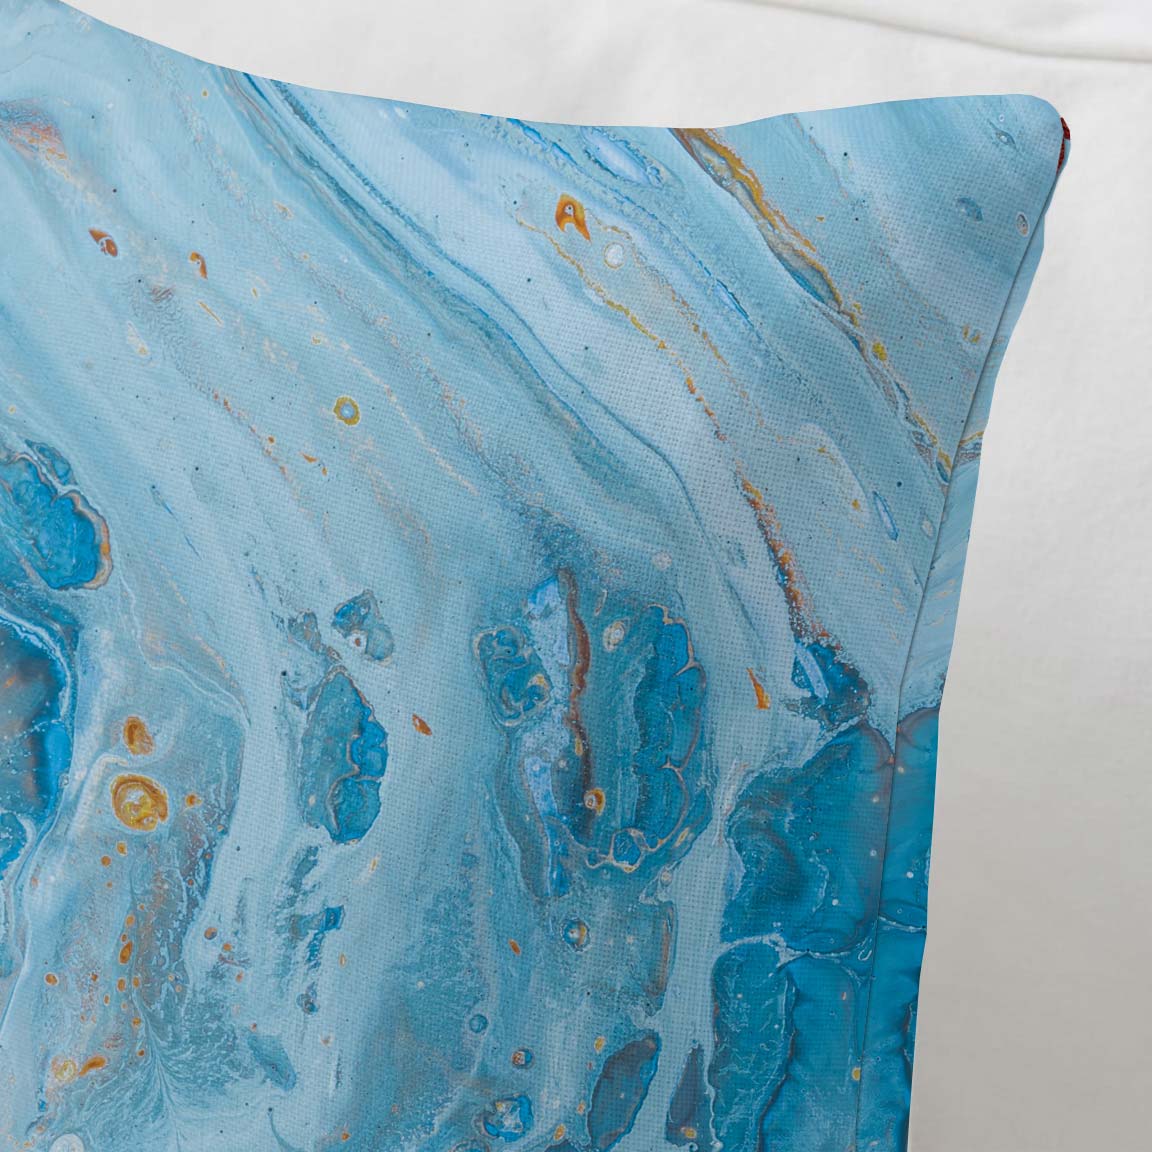 Blue Opal Marble-Stone Cushion Cover Trendy Home